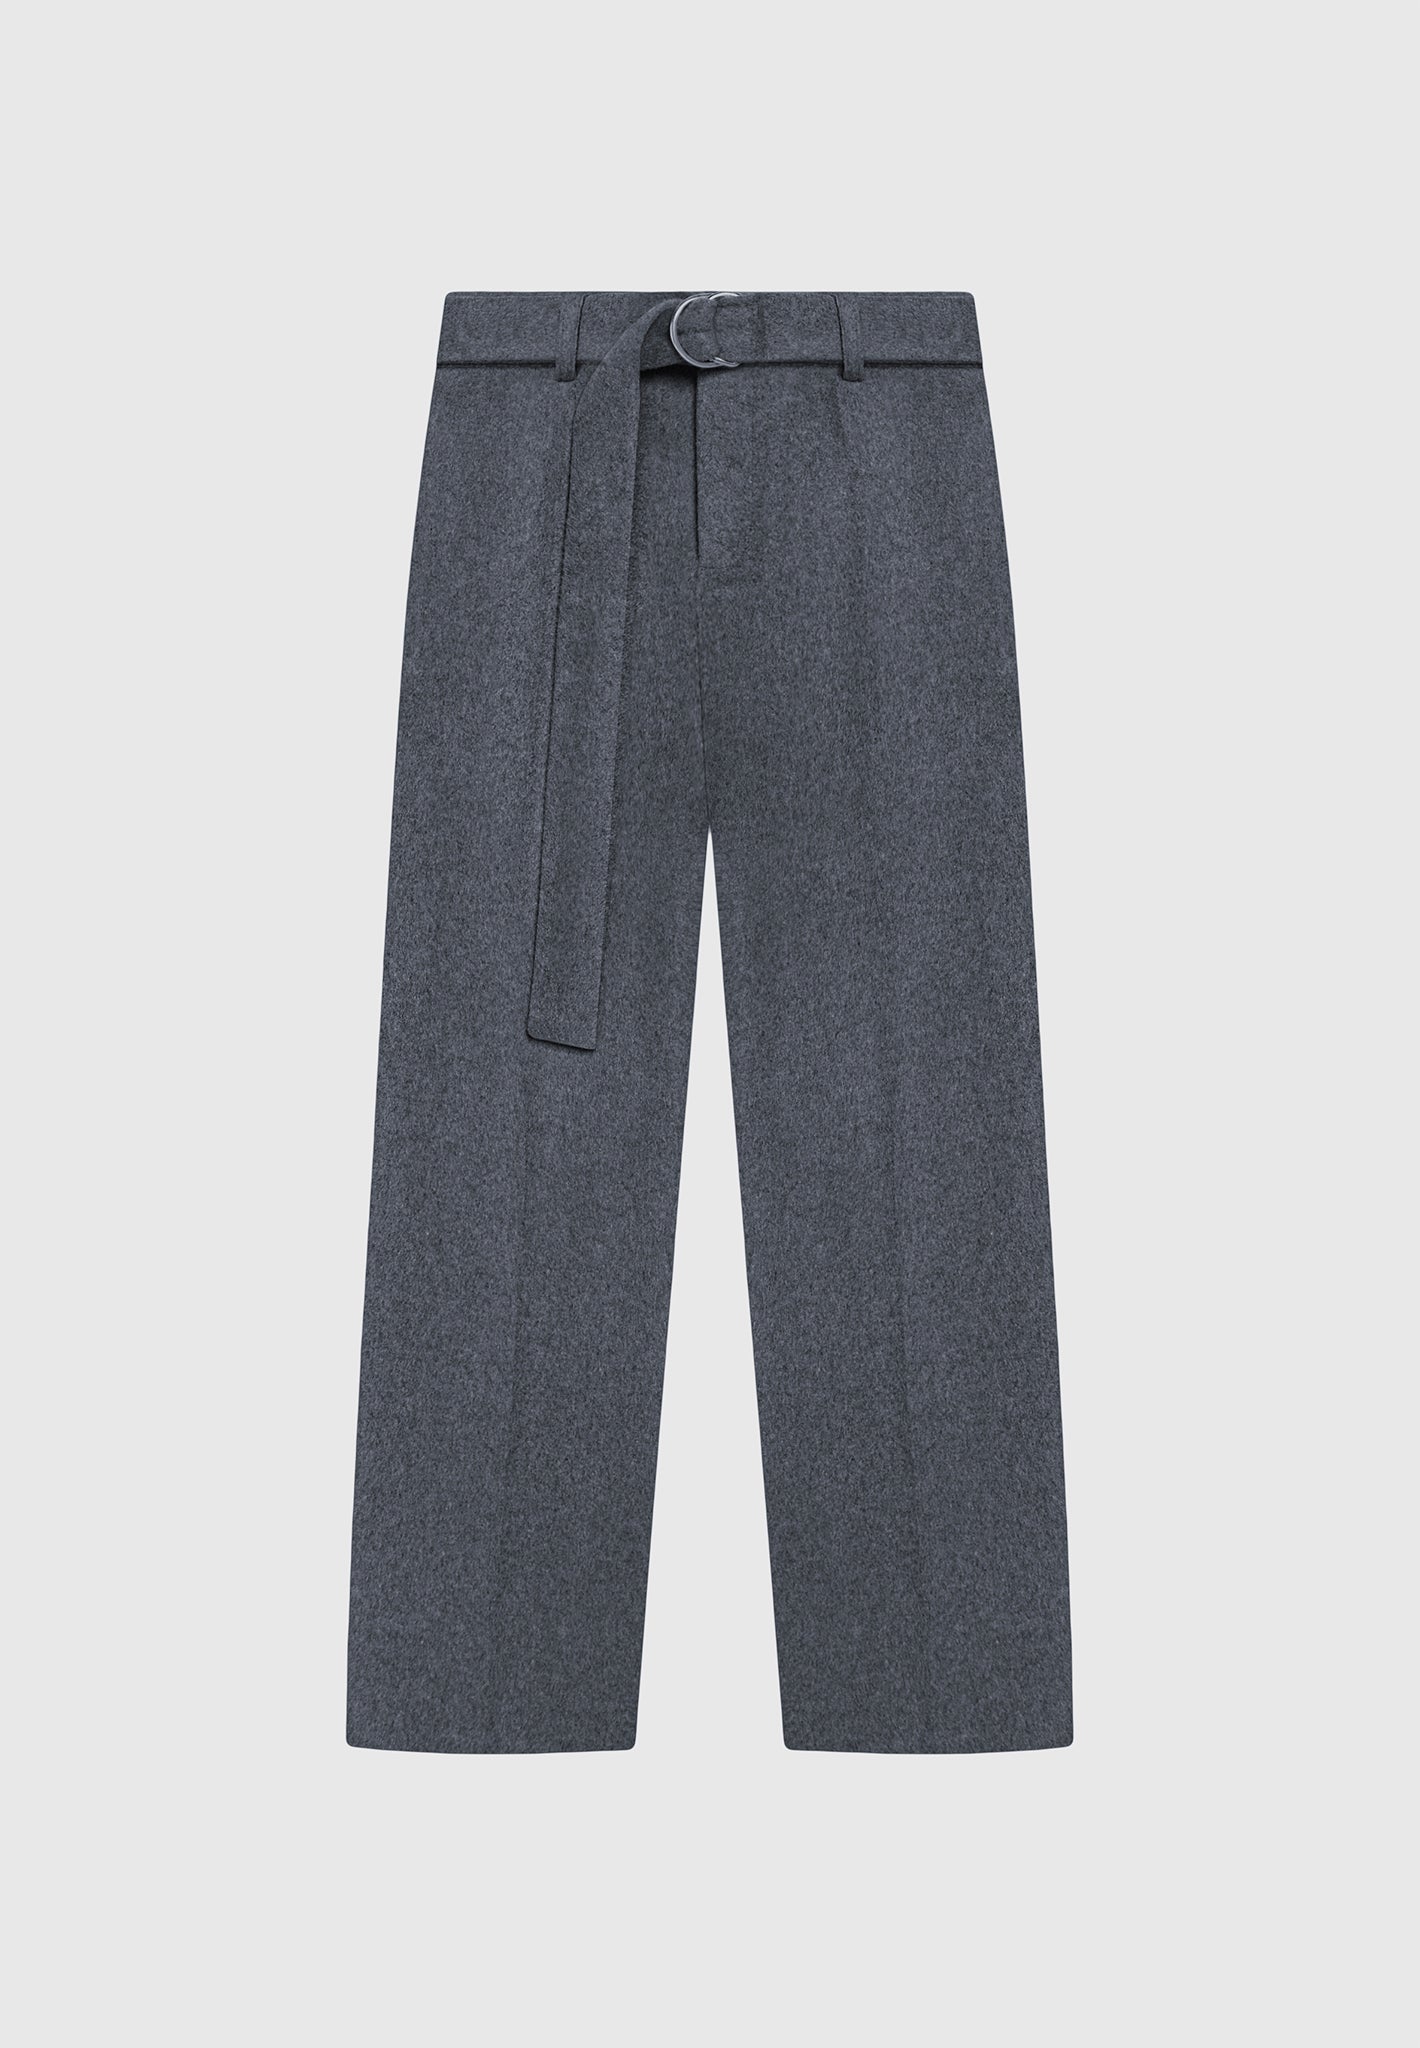 Rest Later Pants - Charcoal Marl